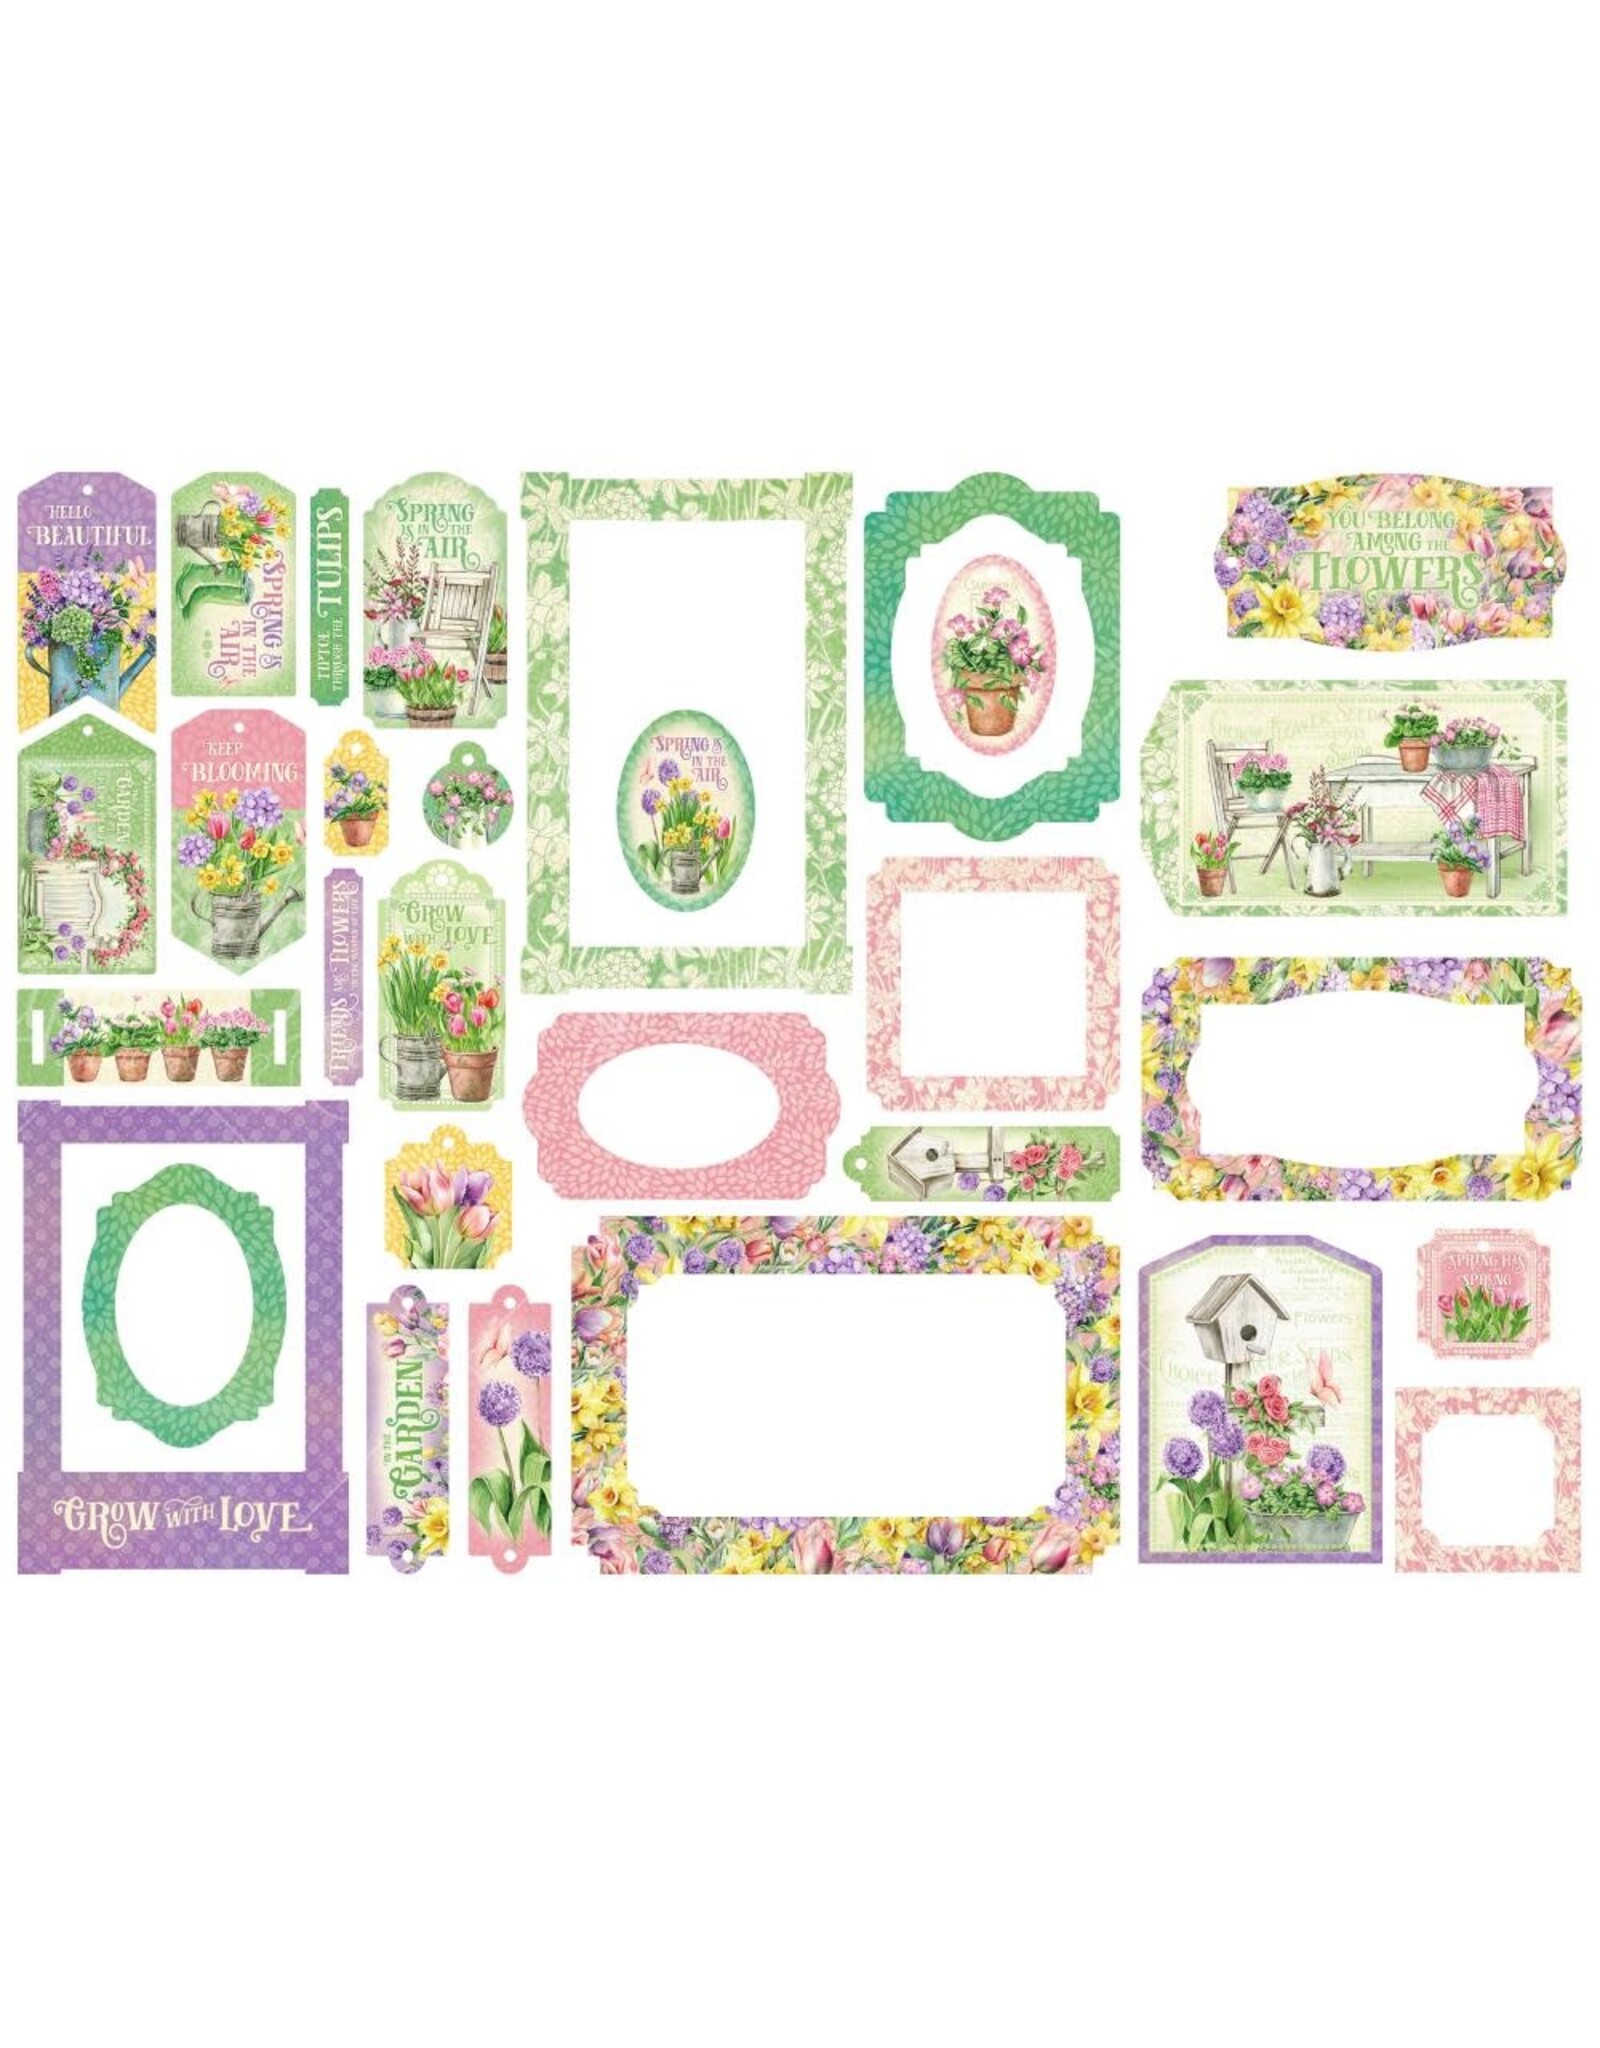 GRAPHIC 45 GRAPHIC 45 GROW WITH LOVE COLLECTION CHIPBOARD TAGS & FRAMES 30/PK